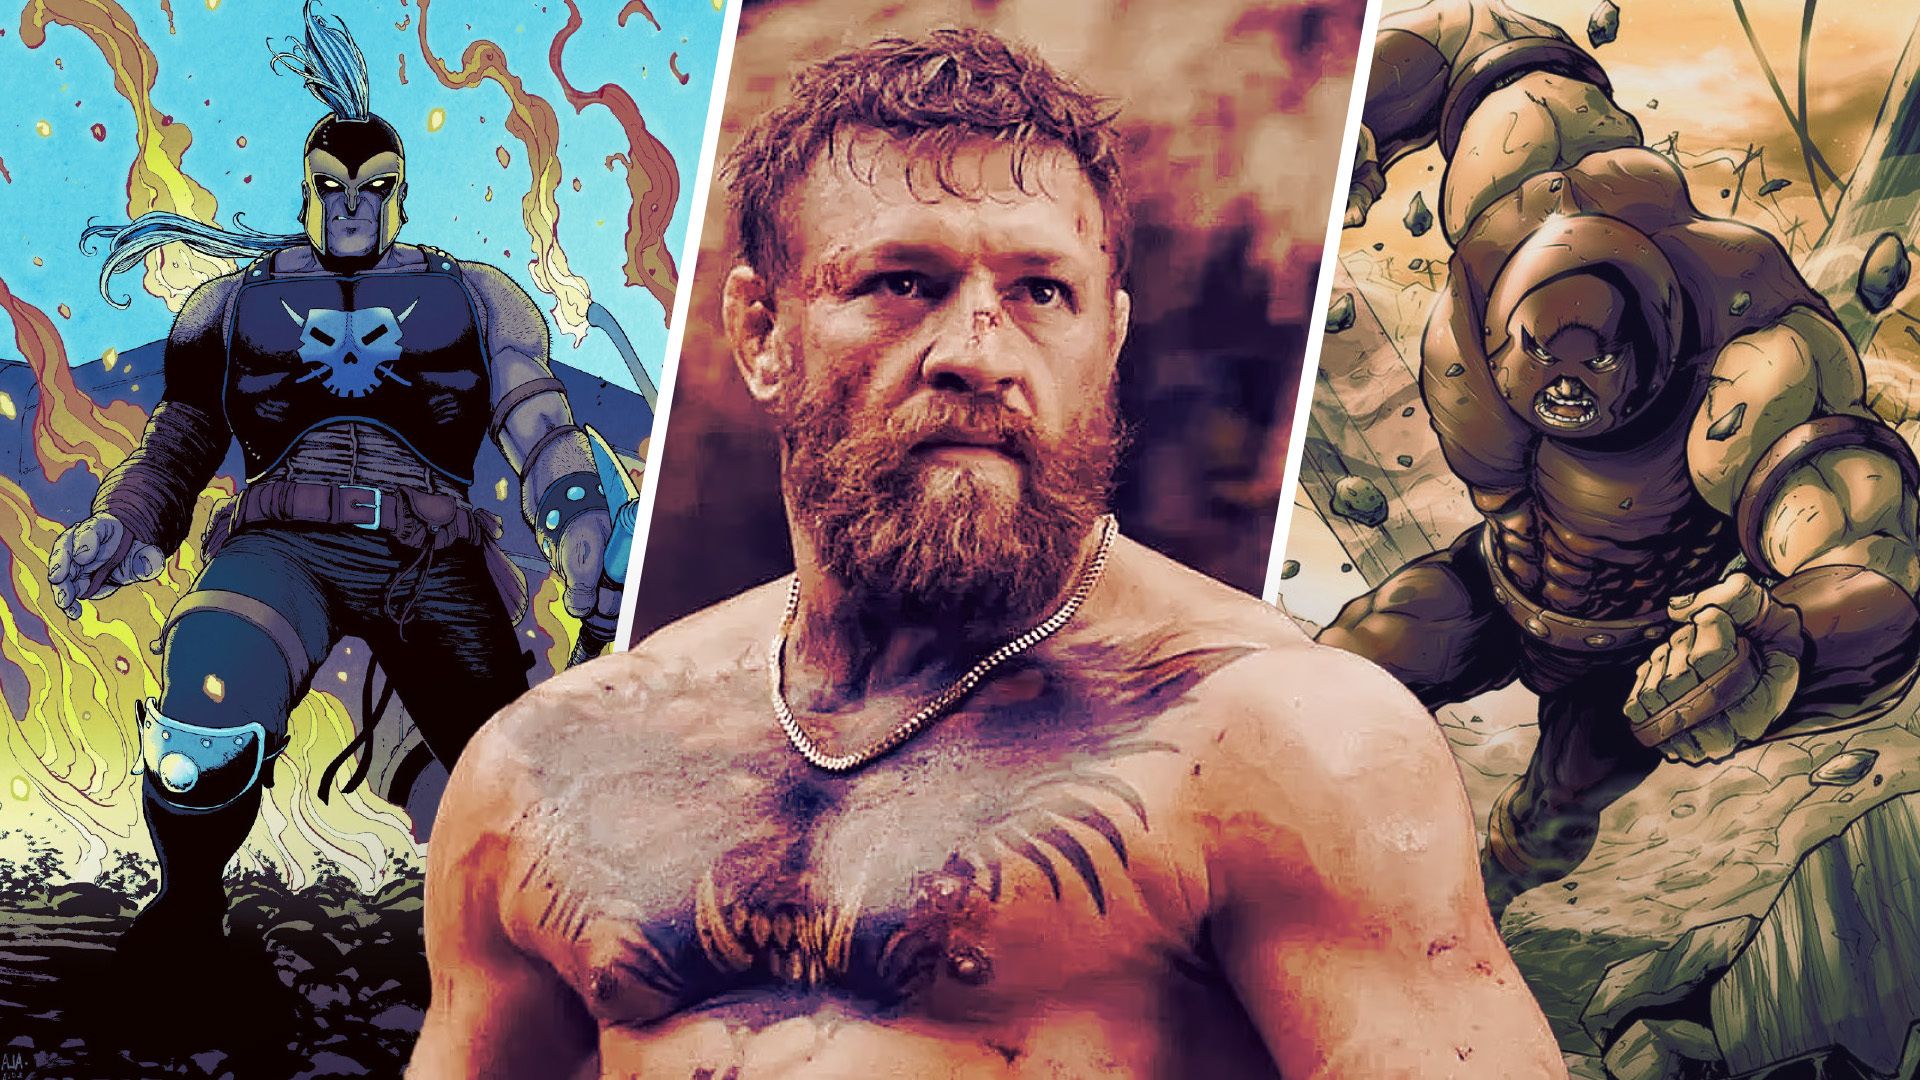 Ares and Juggernaut from Marvel Comics, and Conor McGregor from Road House